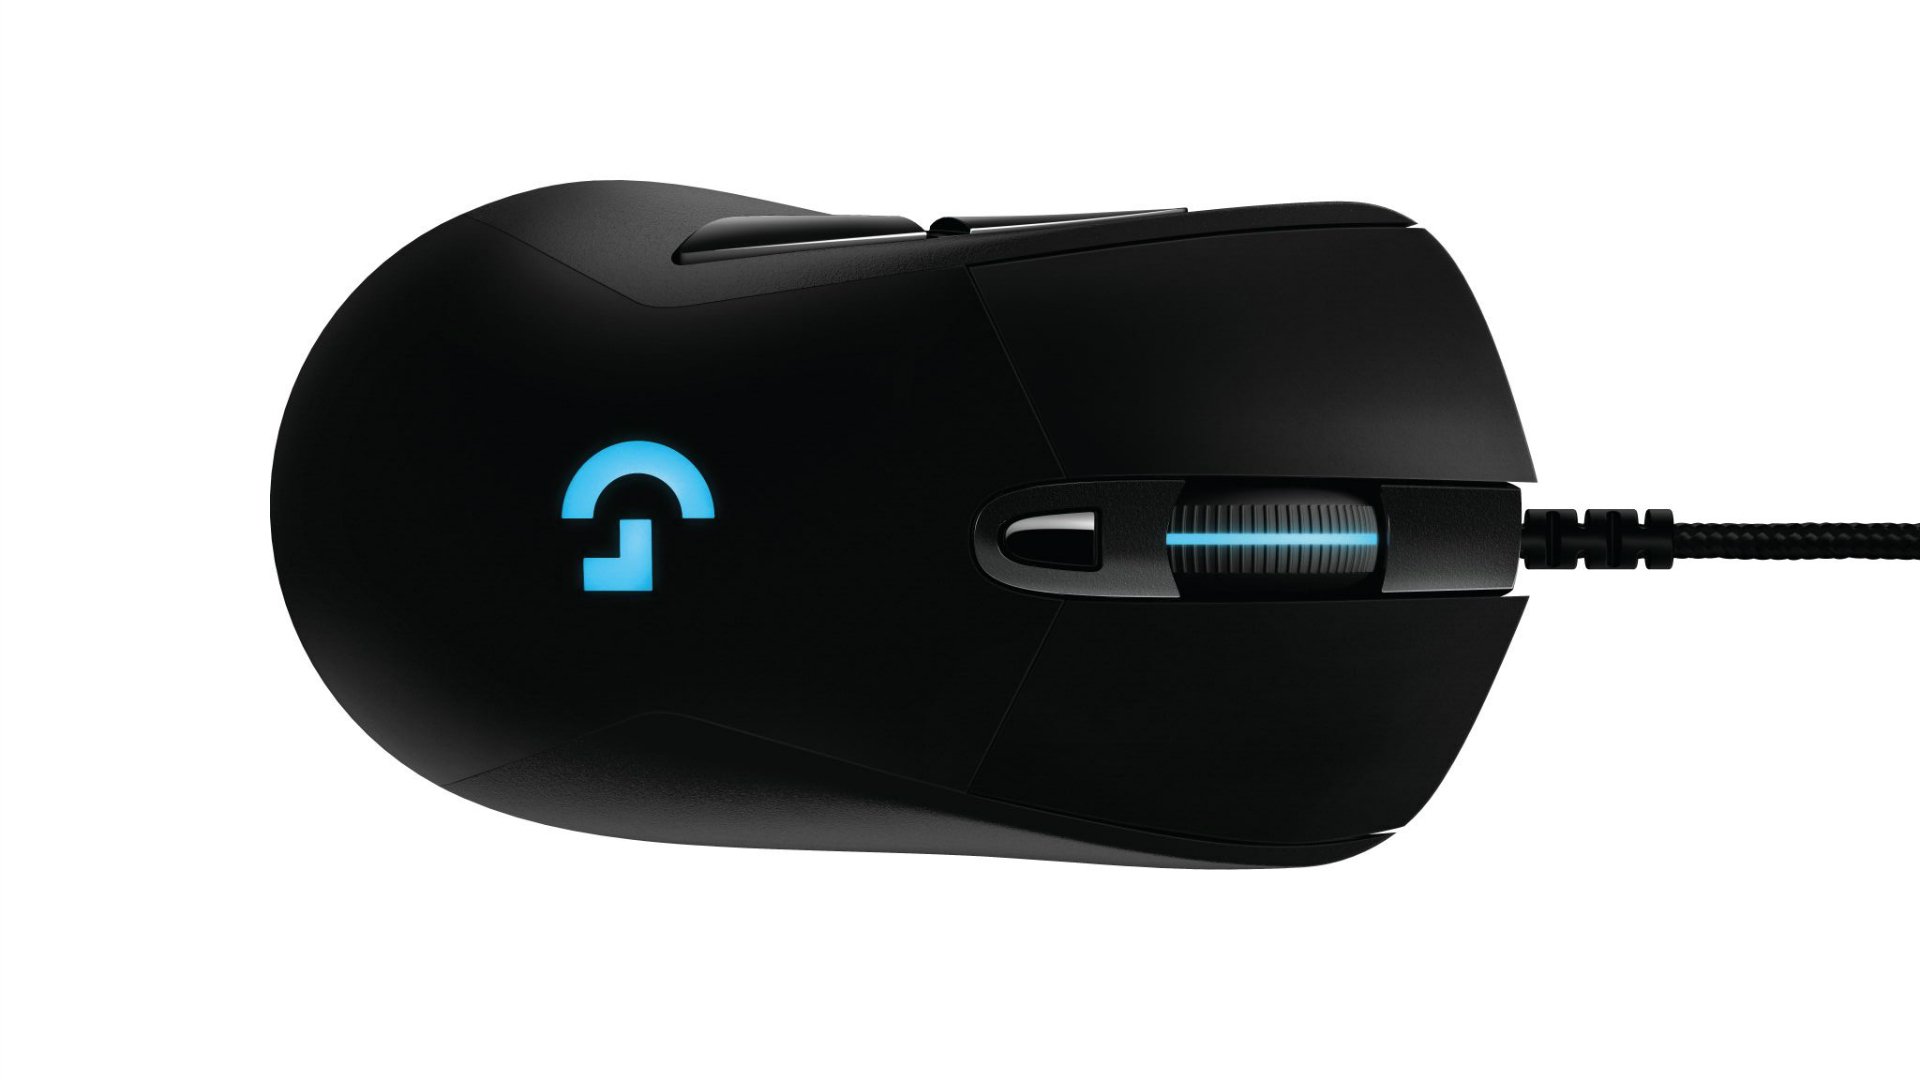 Review: G403 Gaming Mouse (Wired and Wireless) Destructoid